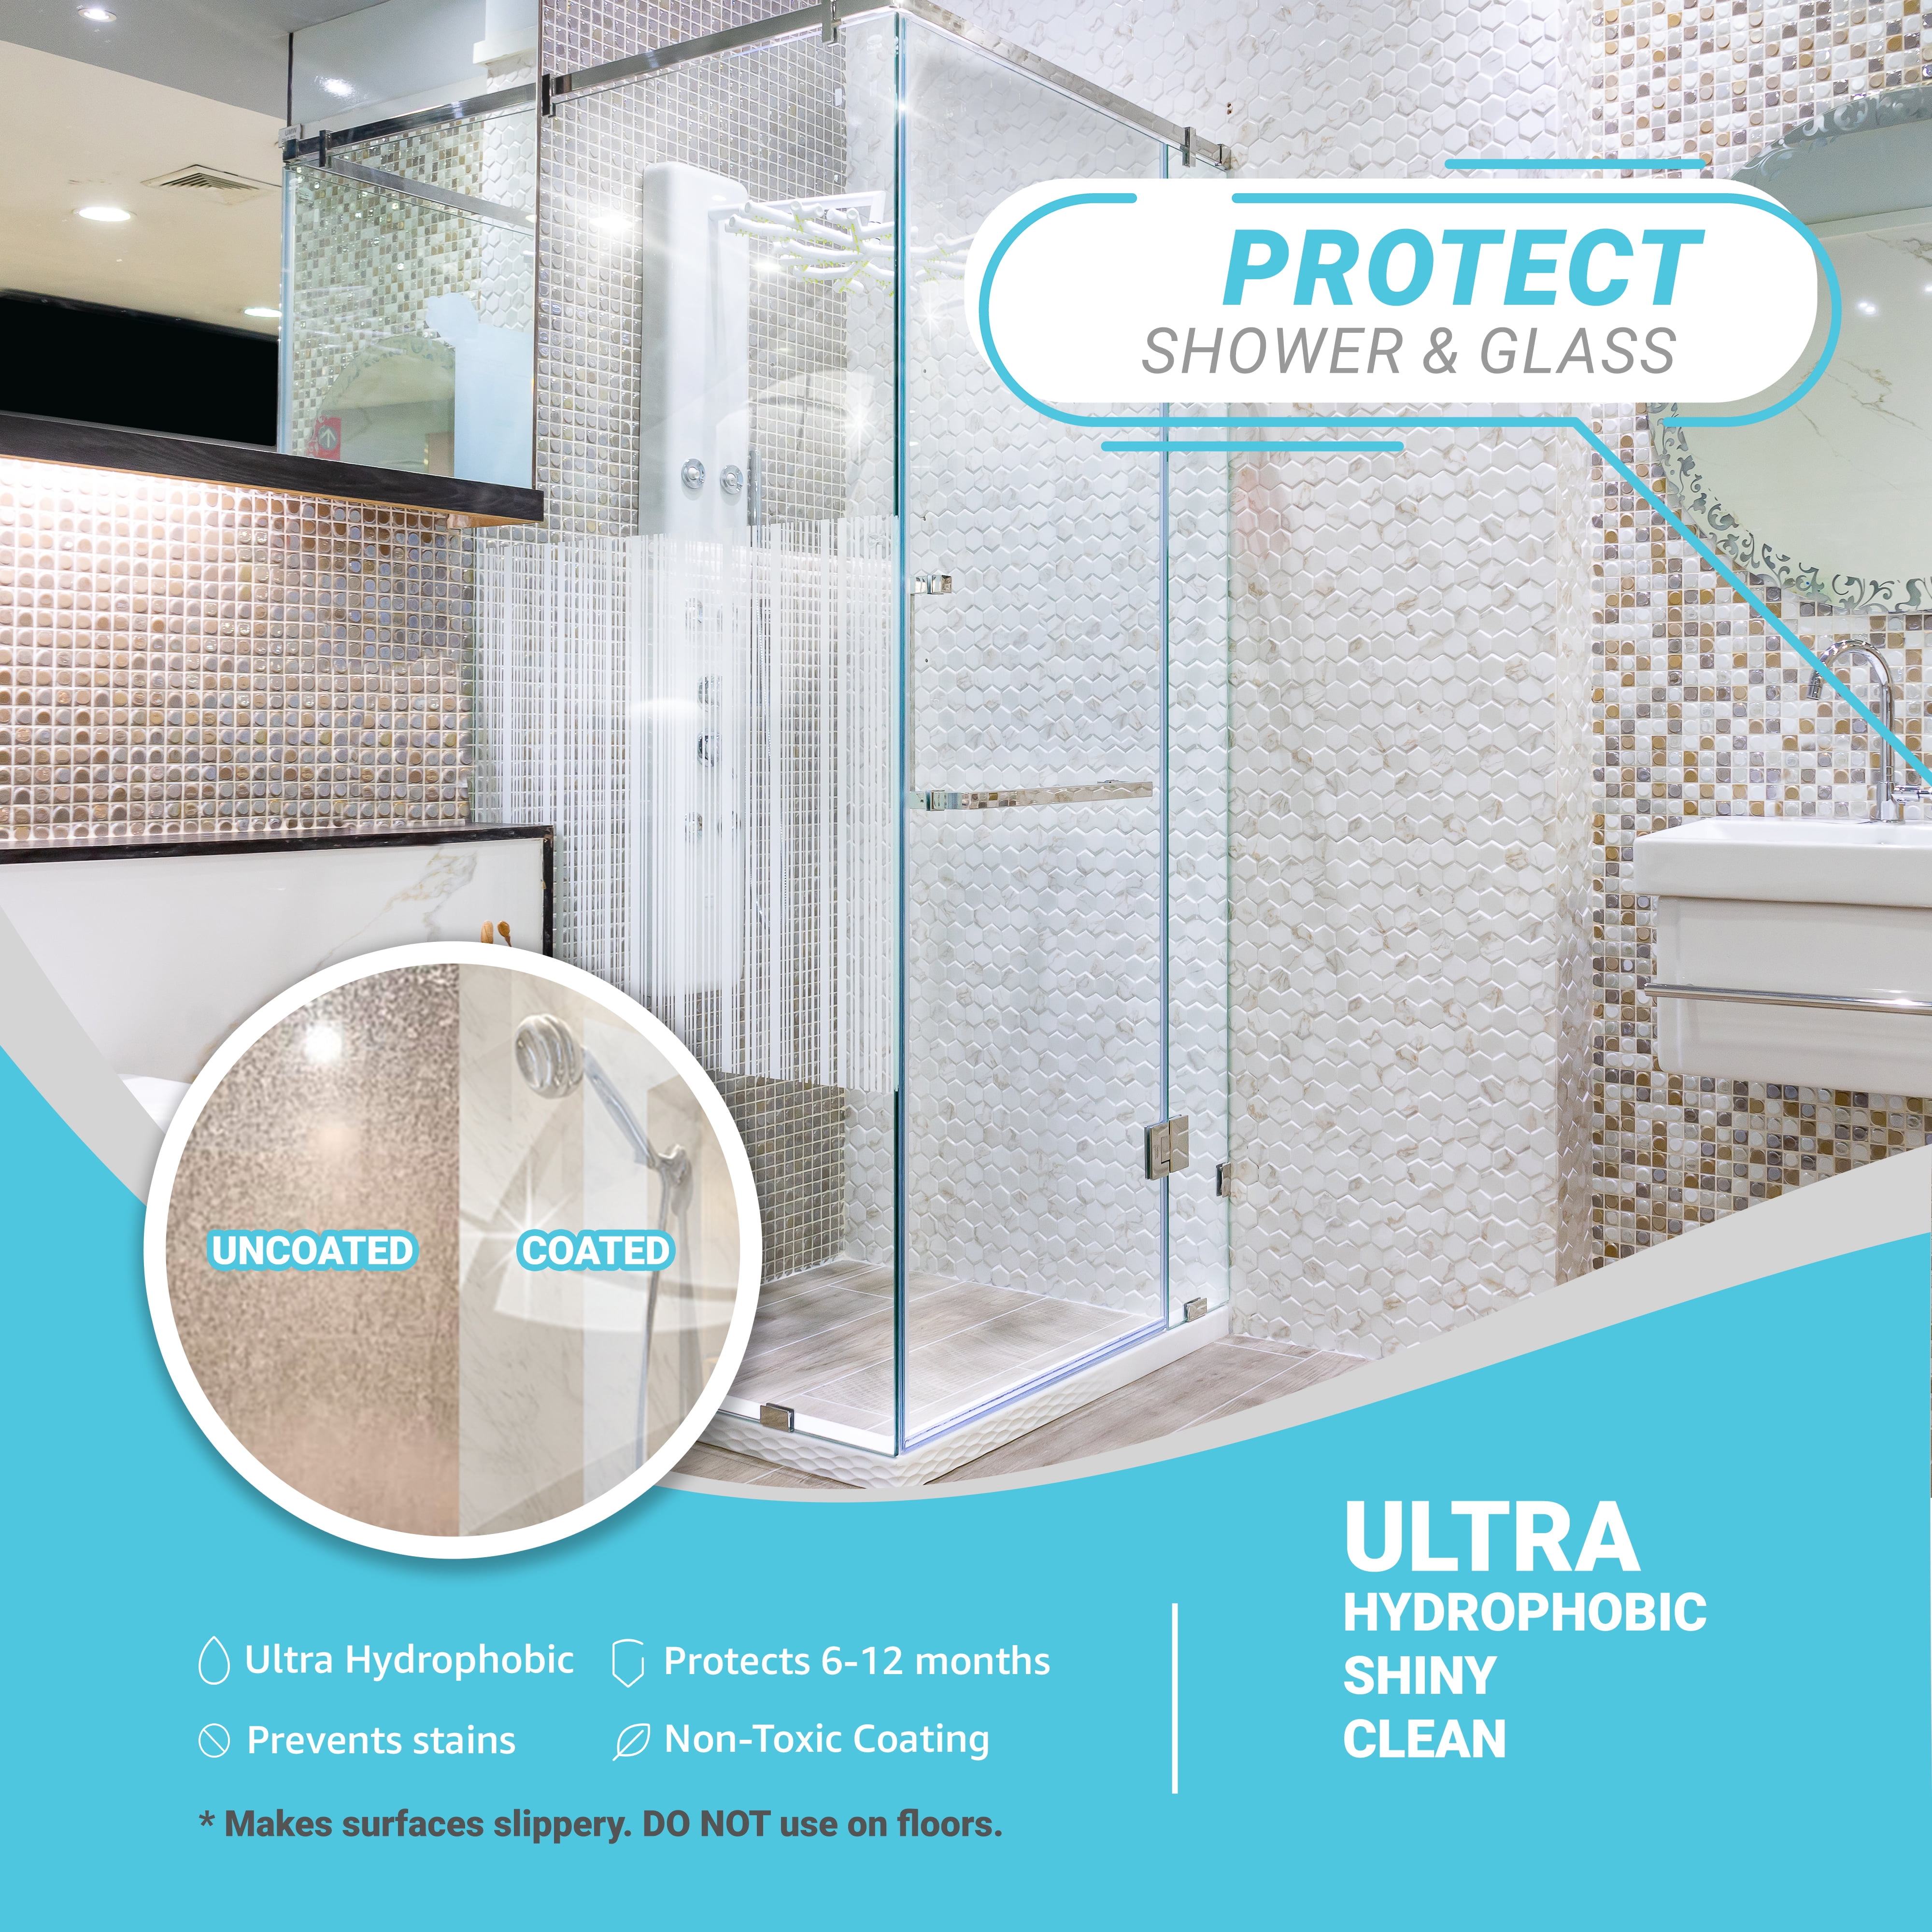 Lifeproof Home Ceramic Coating Spray Kit - Shine, Seal, & Protect Stainless  Steel, Appliances, Countertops, Glass & More Kitchen + Bath Surfaces -  Repels Stains, Grime, Fingerprints, Liquids & More! 